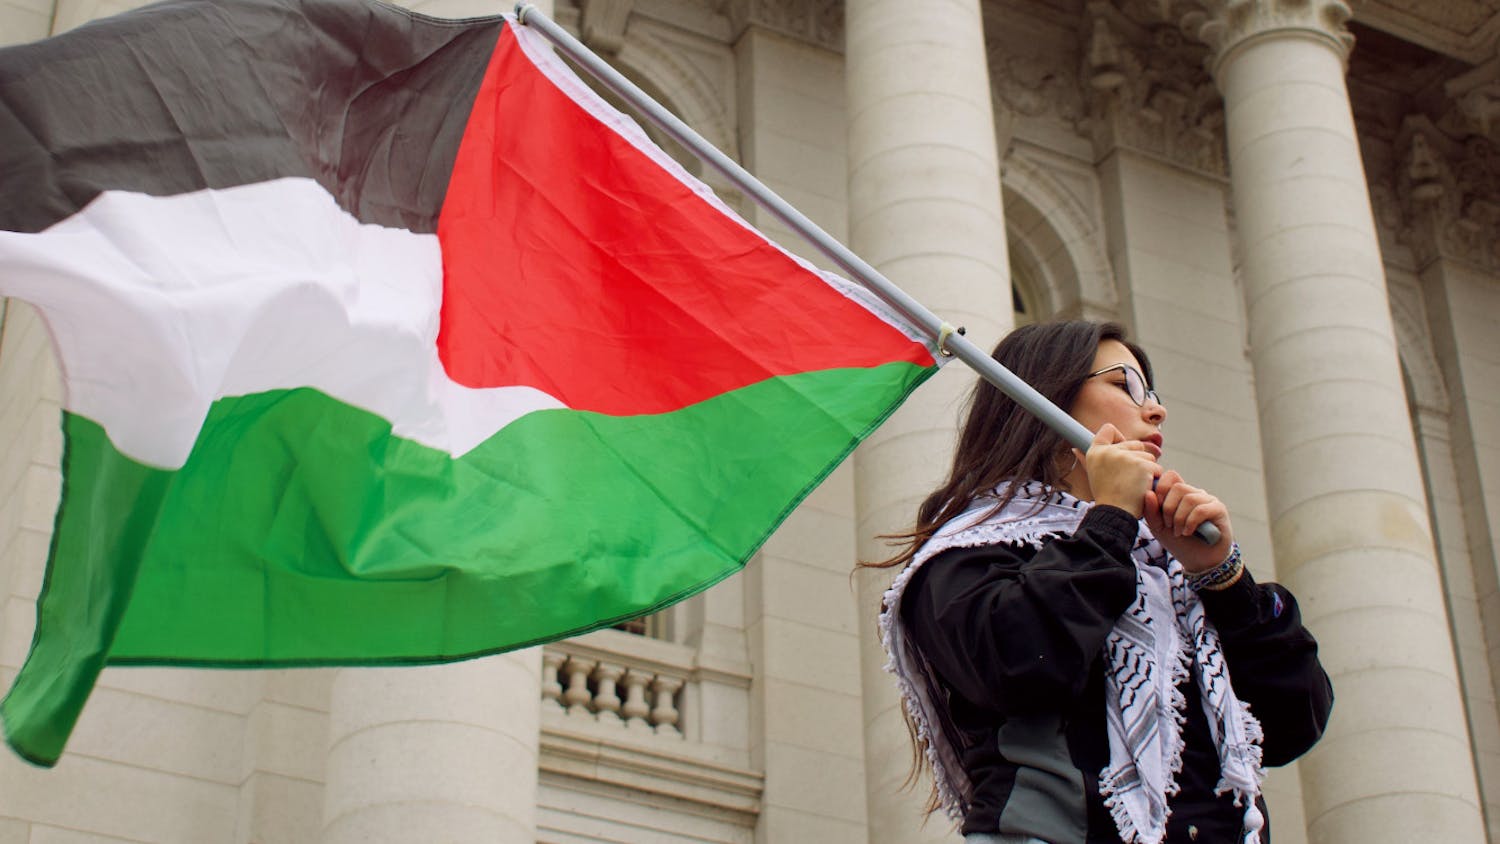 PHOTOS: ‘Wisconsin All Out for Palestine’ protest demands Gaza ceasefire at the Capitol